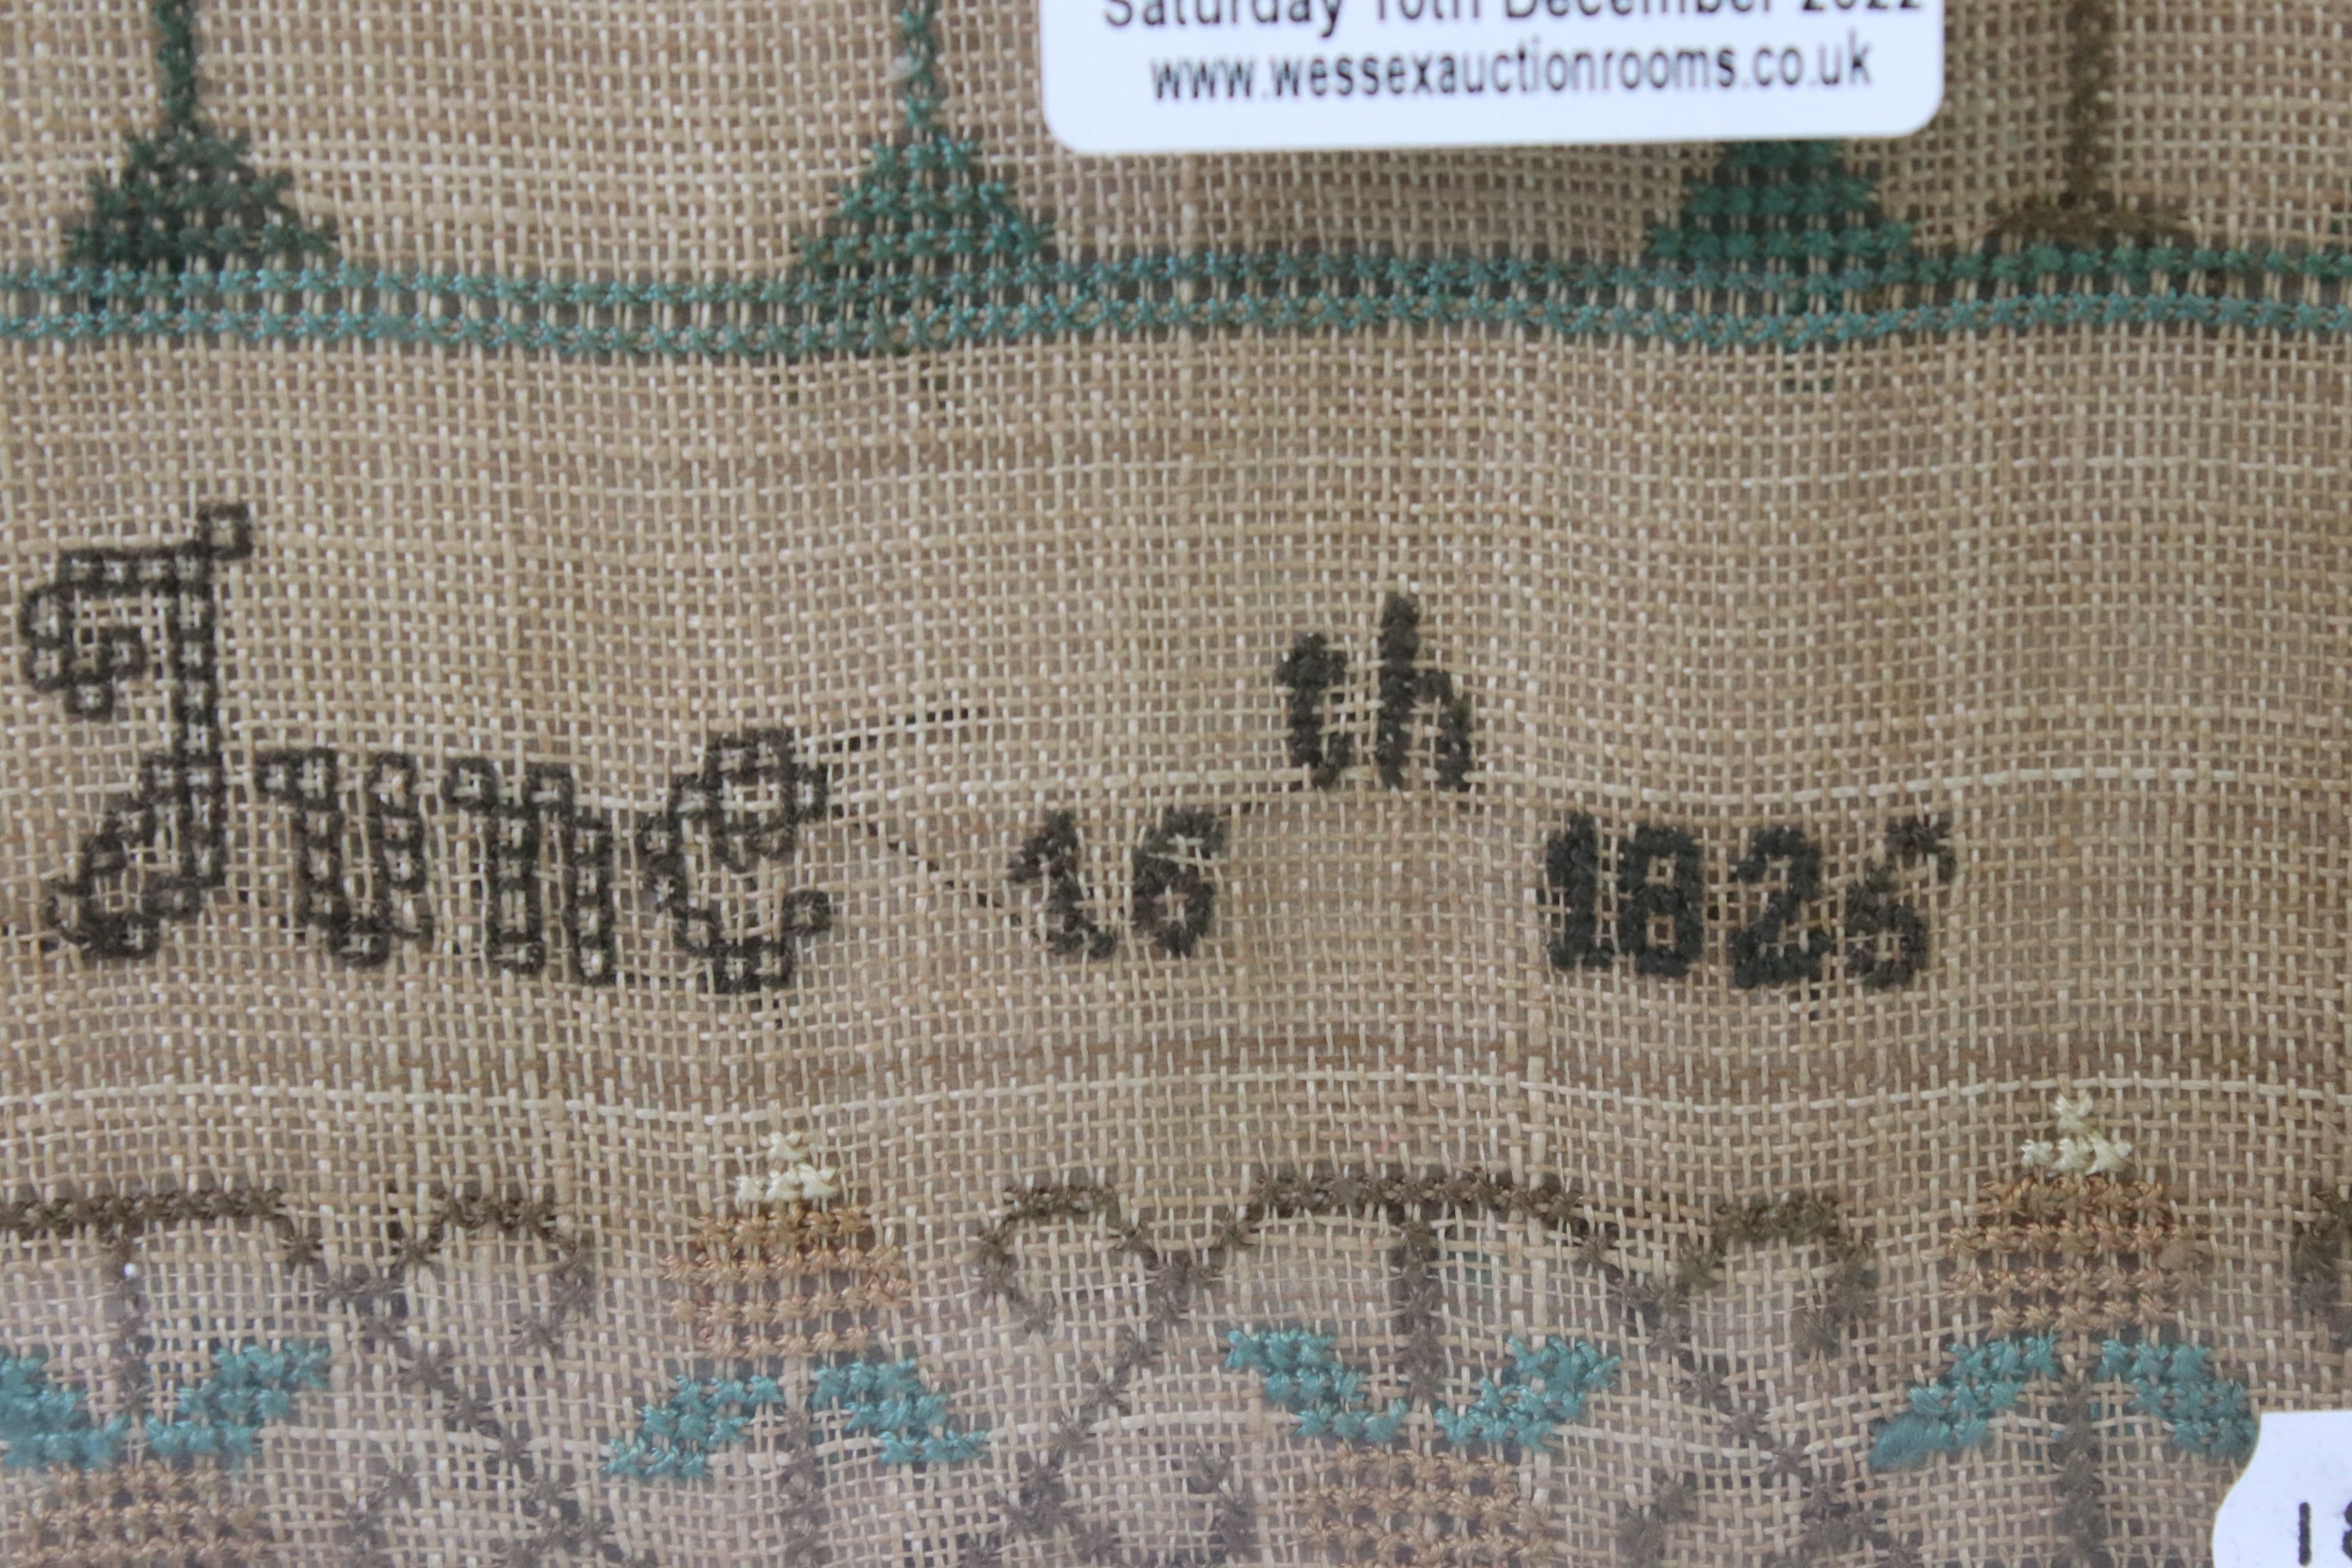 Early 19th century needlework sampler by Mary Bank, dated June 16th 1826, featuring a house, - Image 5 of 7